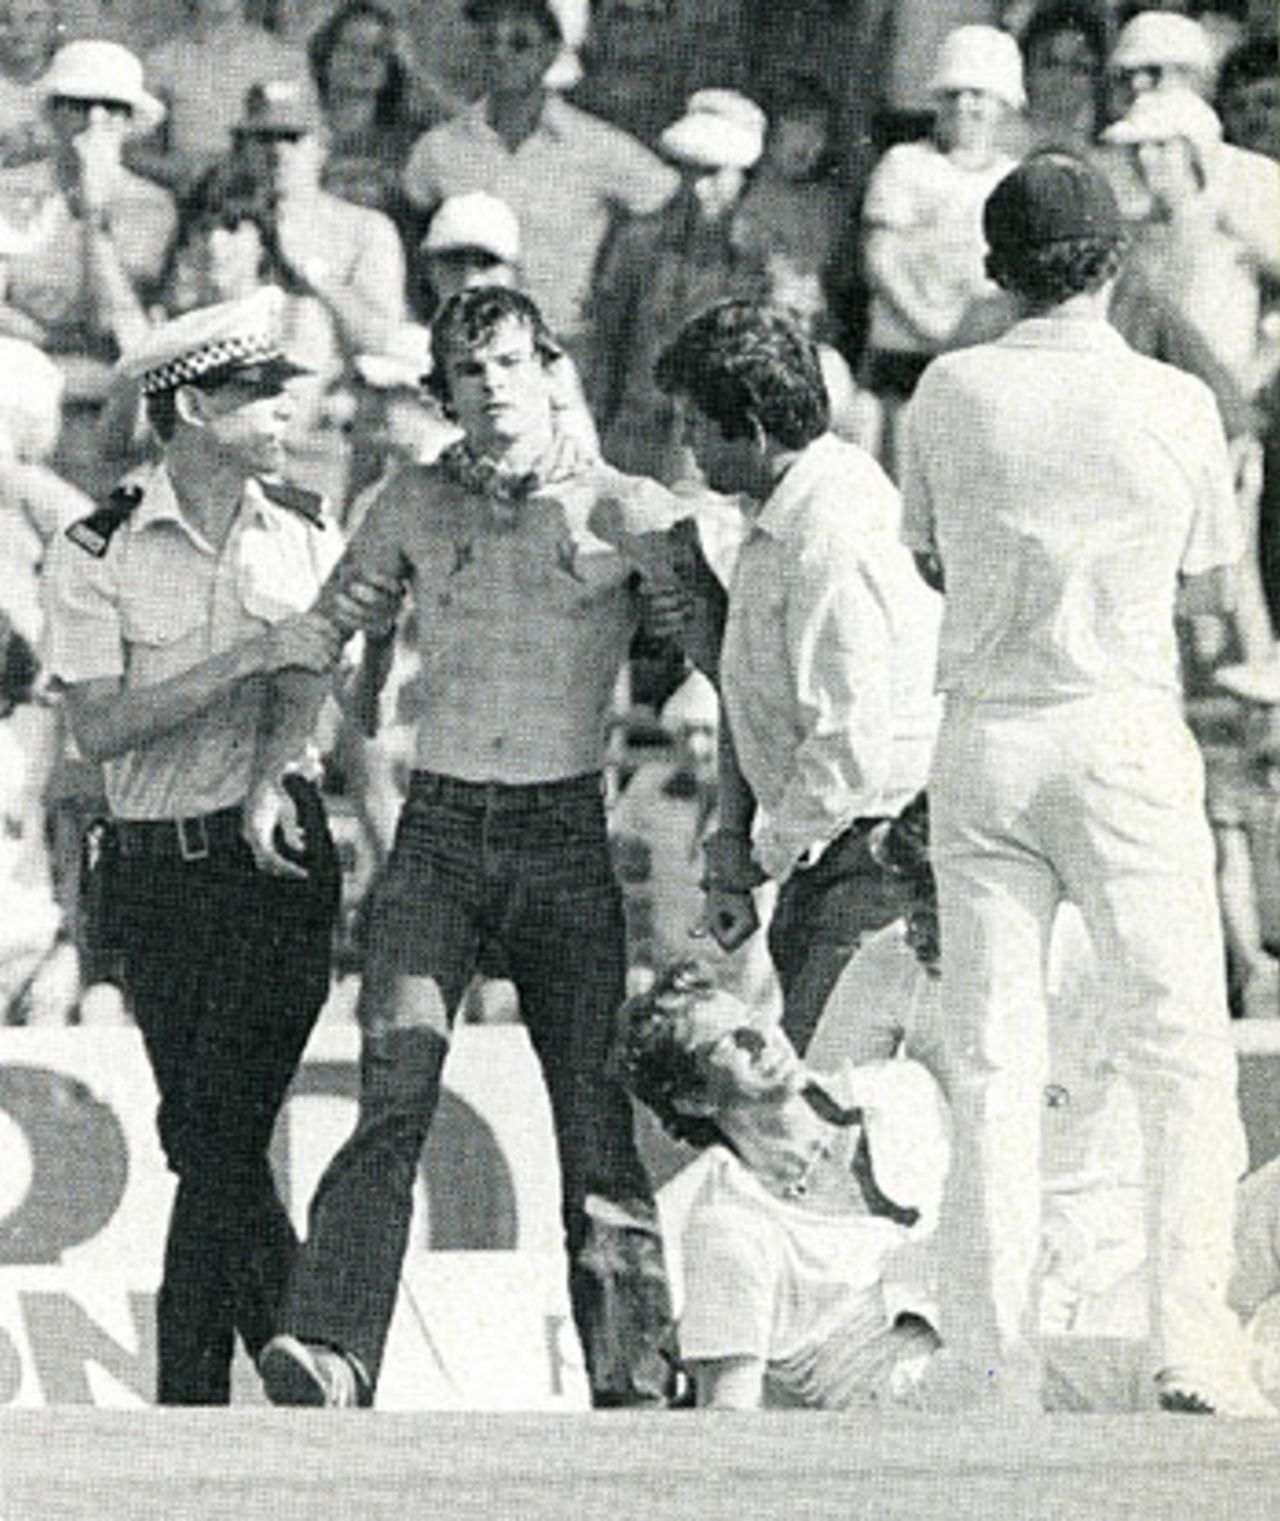 Police deal with the pitch invasion as Terry Alderman lies injured, Australia v England, 1st Test, Perth,November 12, 1982